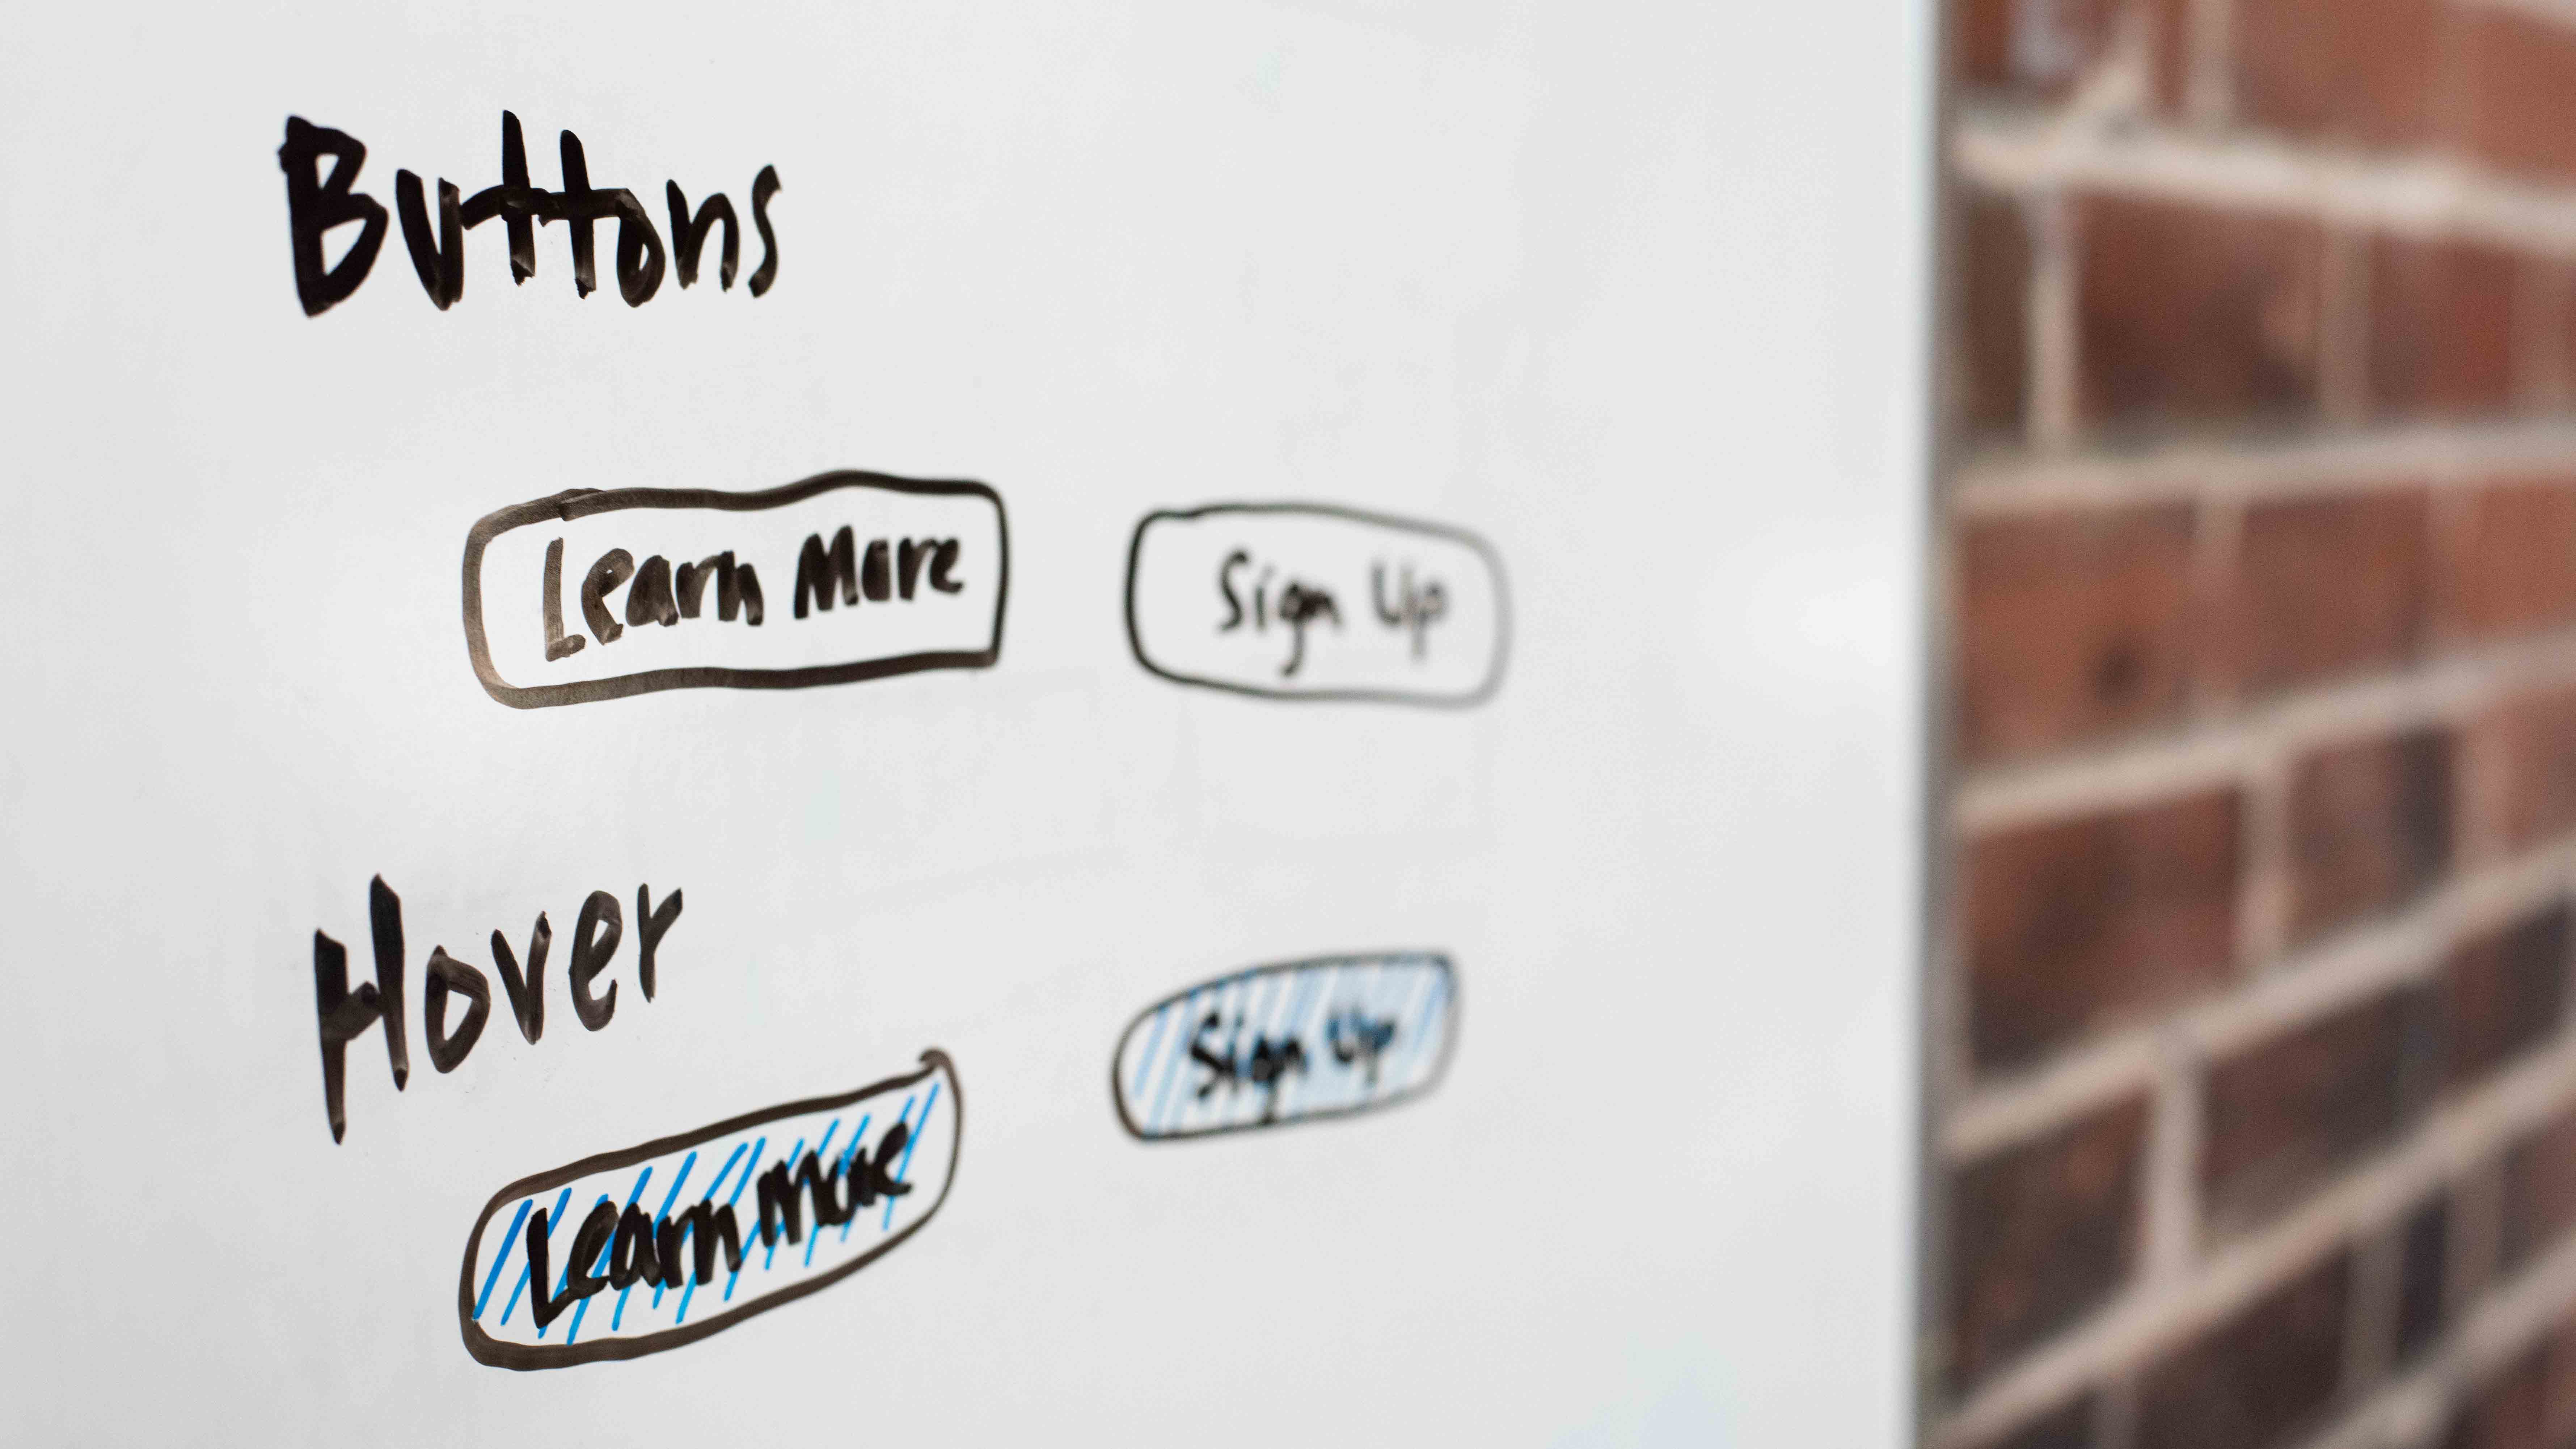 UX whiteboard sketch of button and hover designs